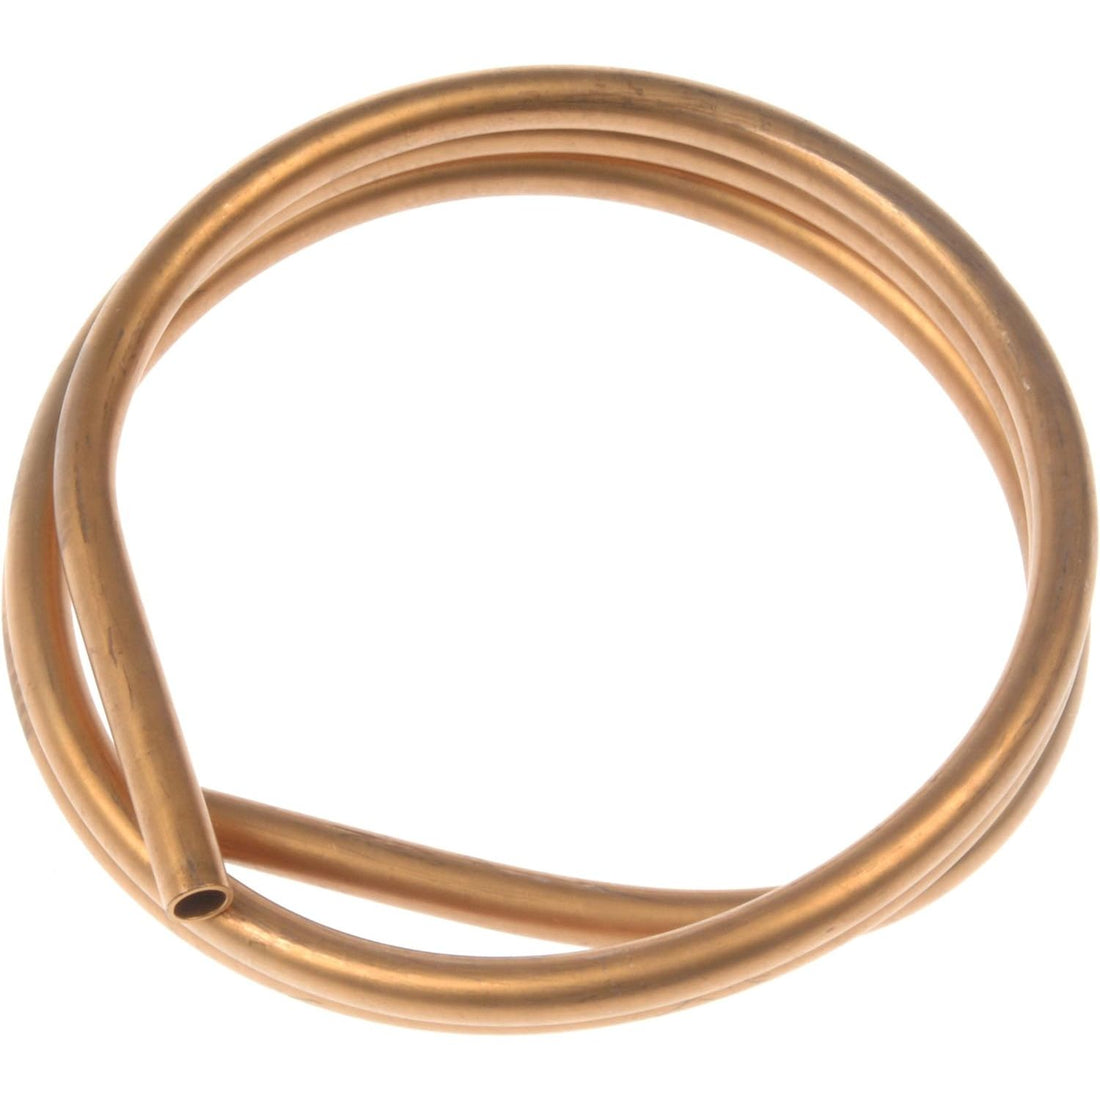 Dorman 510-012 Copper Tubing - 3/8 In. x 25 Ft. x .032 In., 25 Pack Universal Fit